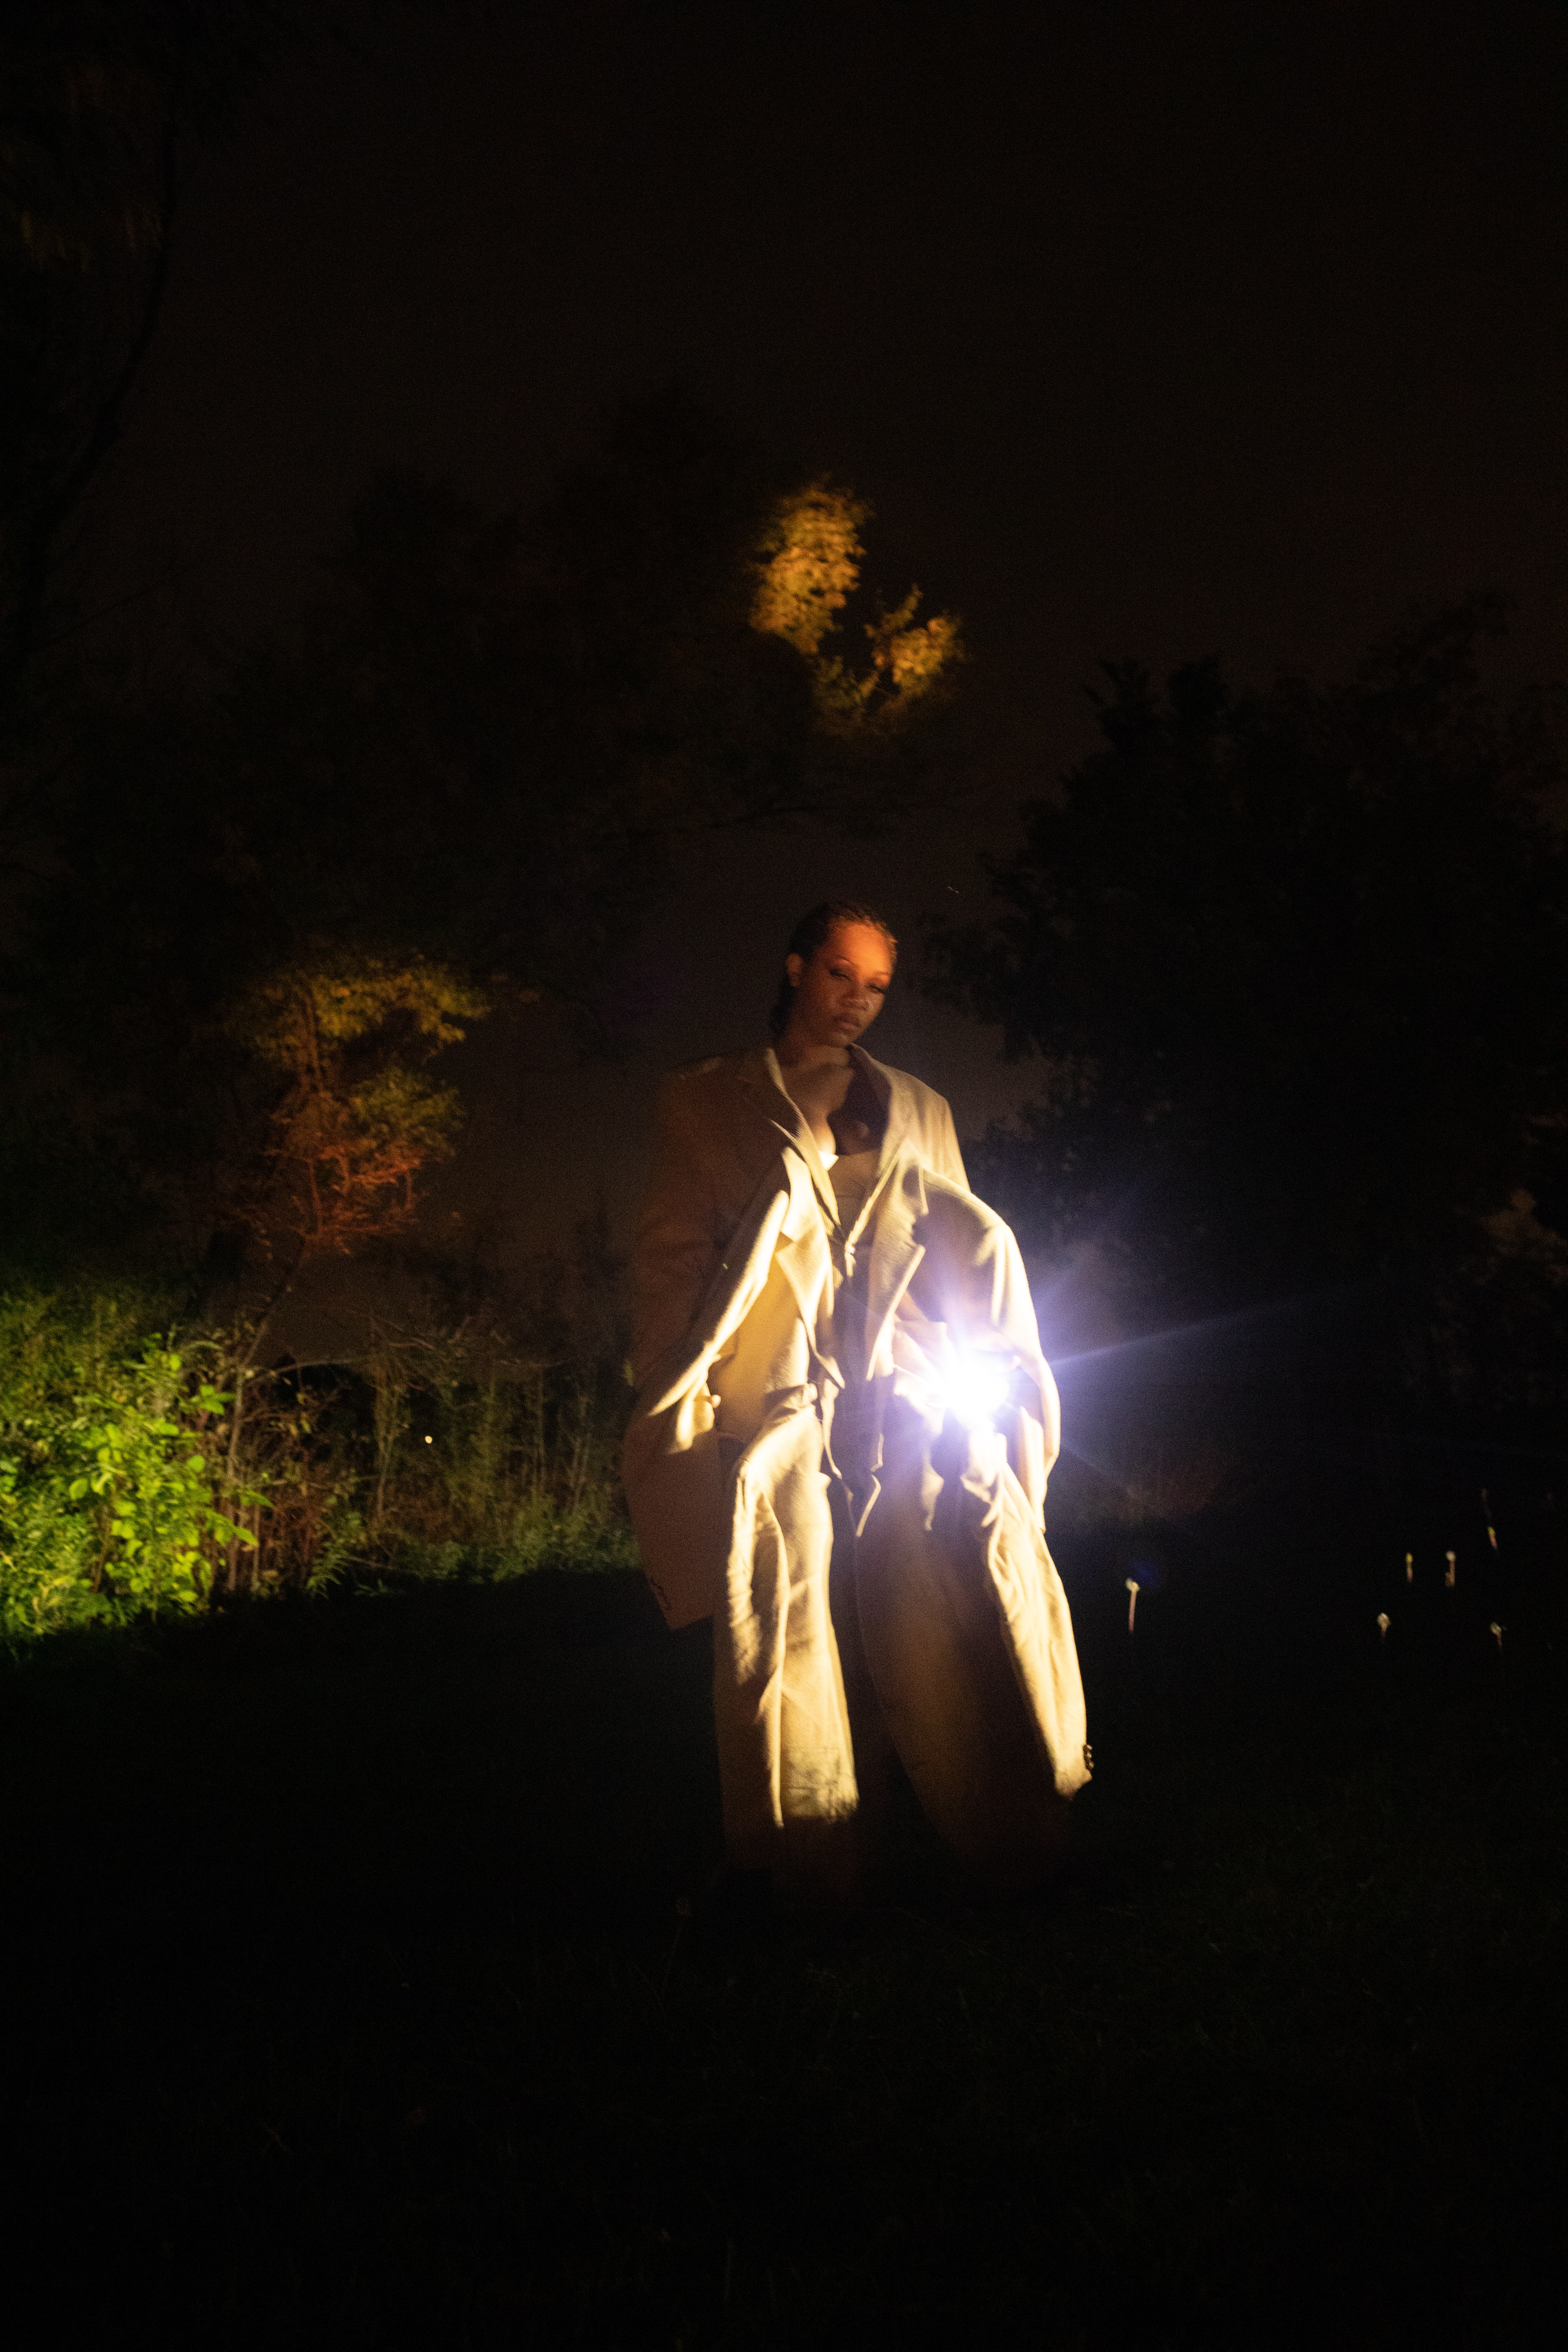 A person stands outside at night holding something glowing.